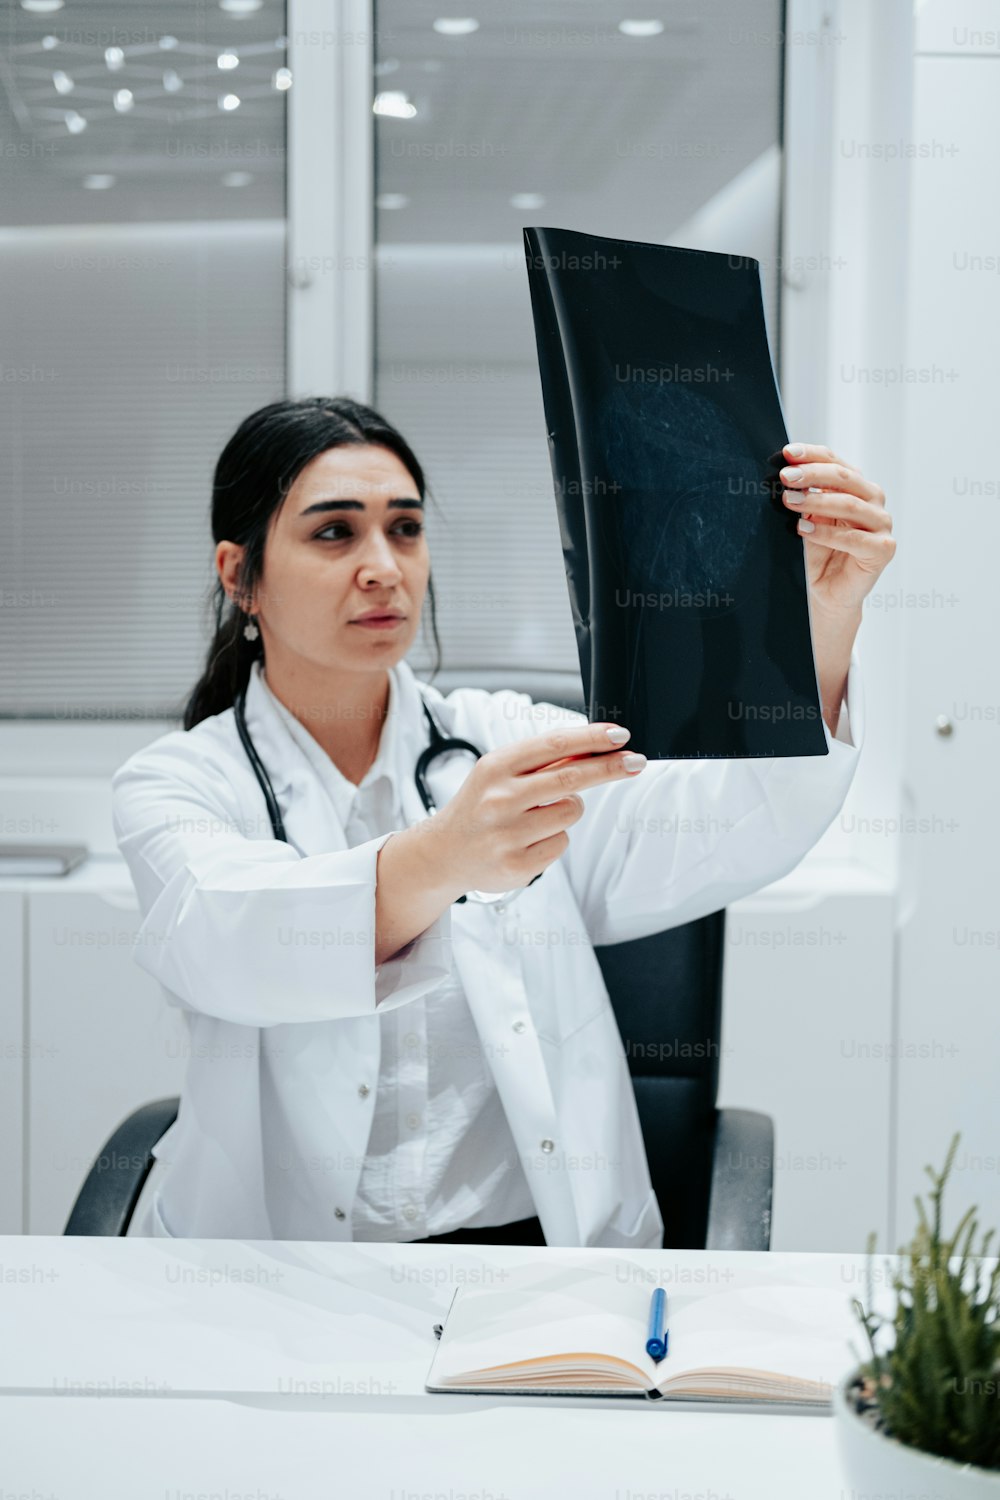 a woman in a white lab coat is holding a book